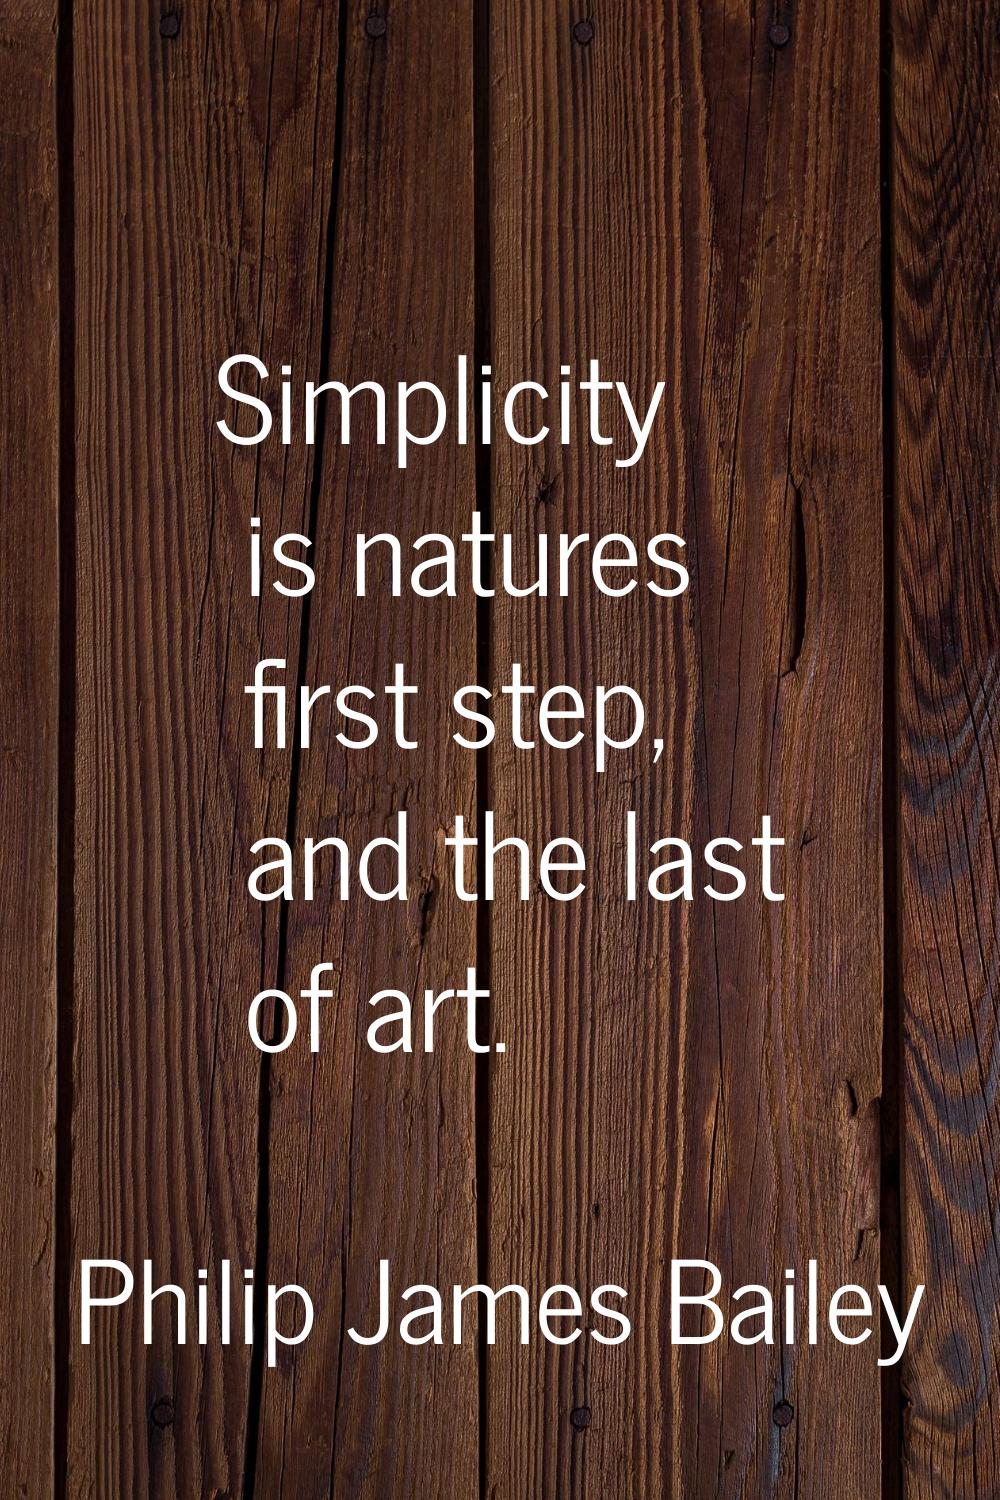 Simplicity is natures first step, and the last of art.